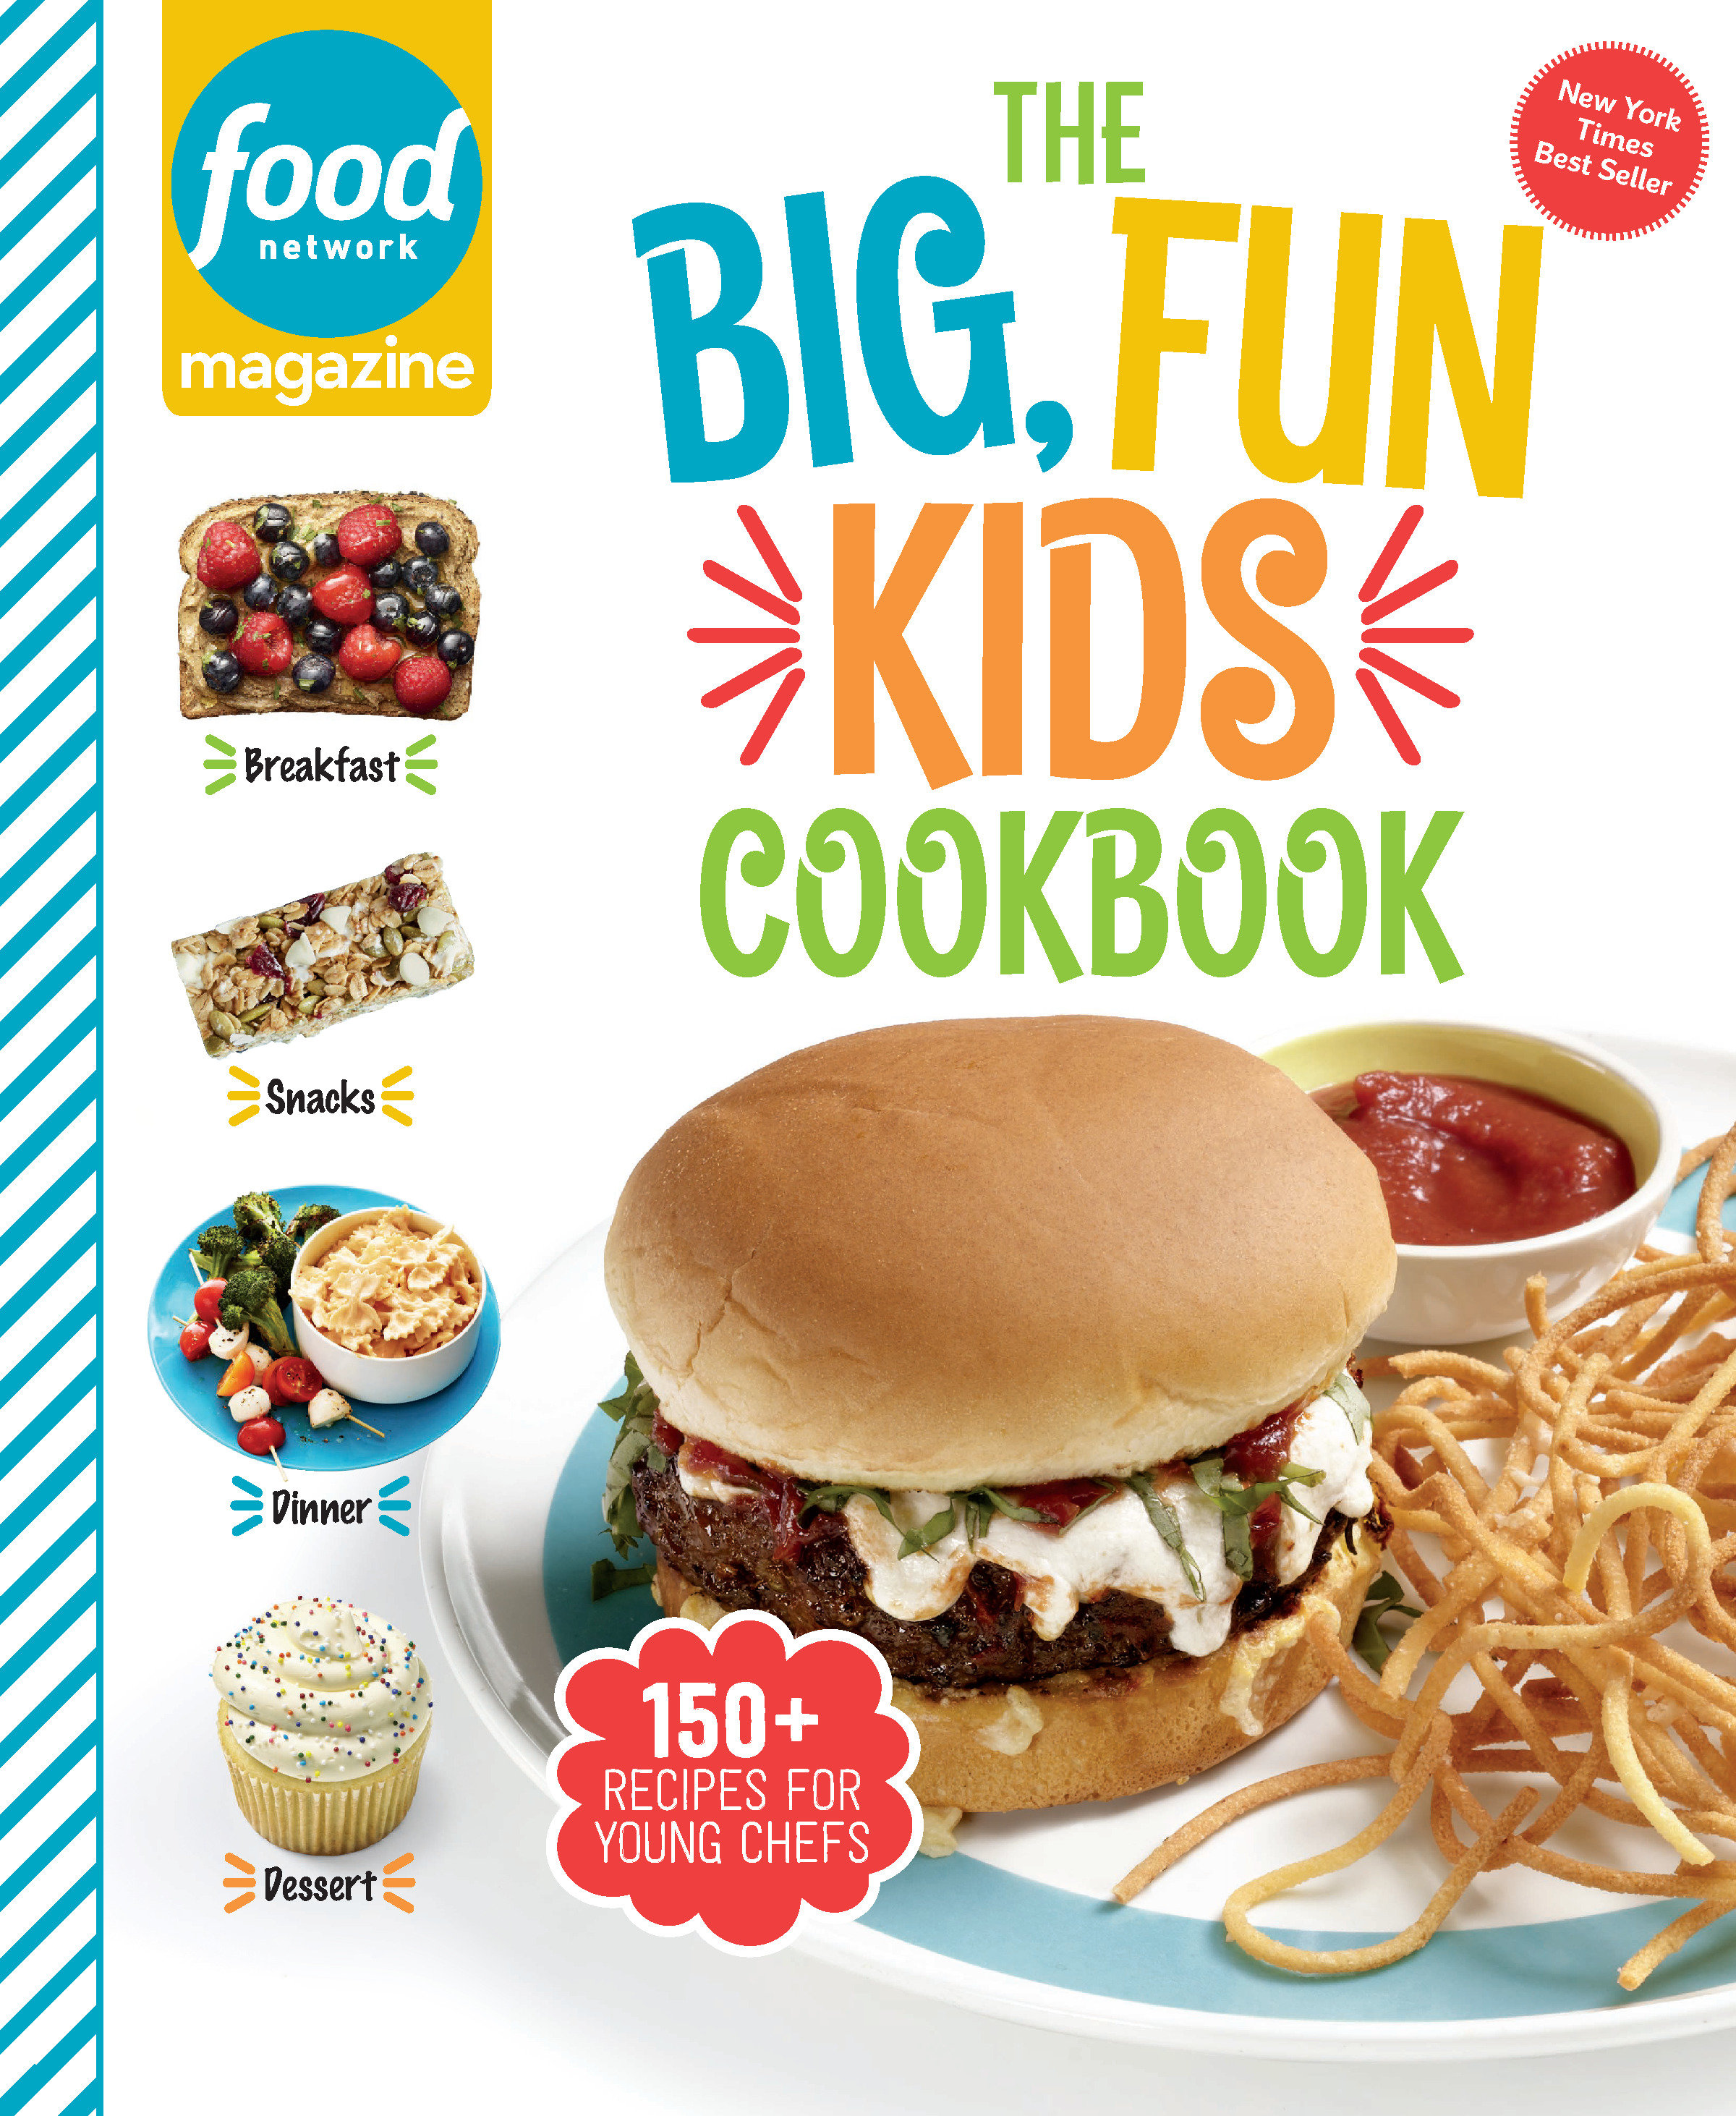 Image de couverture de Food Network Magazine The Big, Fun Kids Cookbook [electronic resource] : 150+ Recipes for Young Chefs